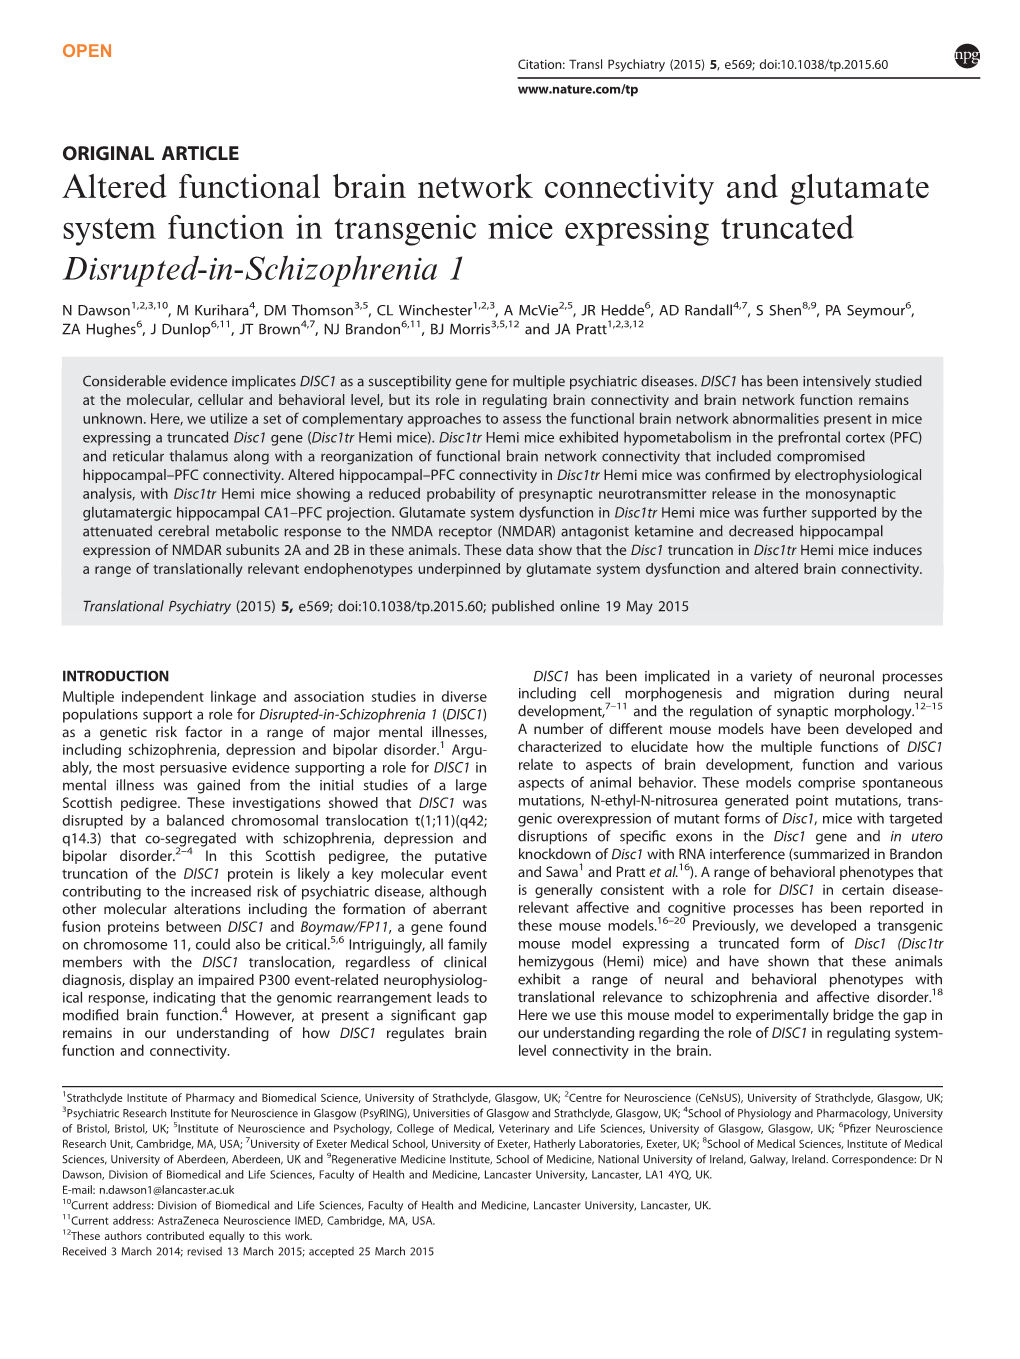 Altered Functional Brain Network Connectivity and Glutamate System Function in Transgenic Mice Expressing Truncated Disrupted-In-Schizophrenia 1